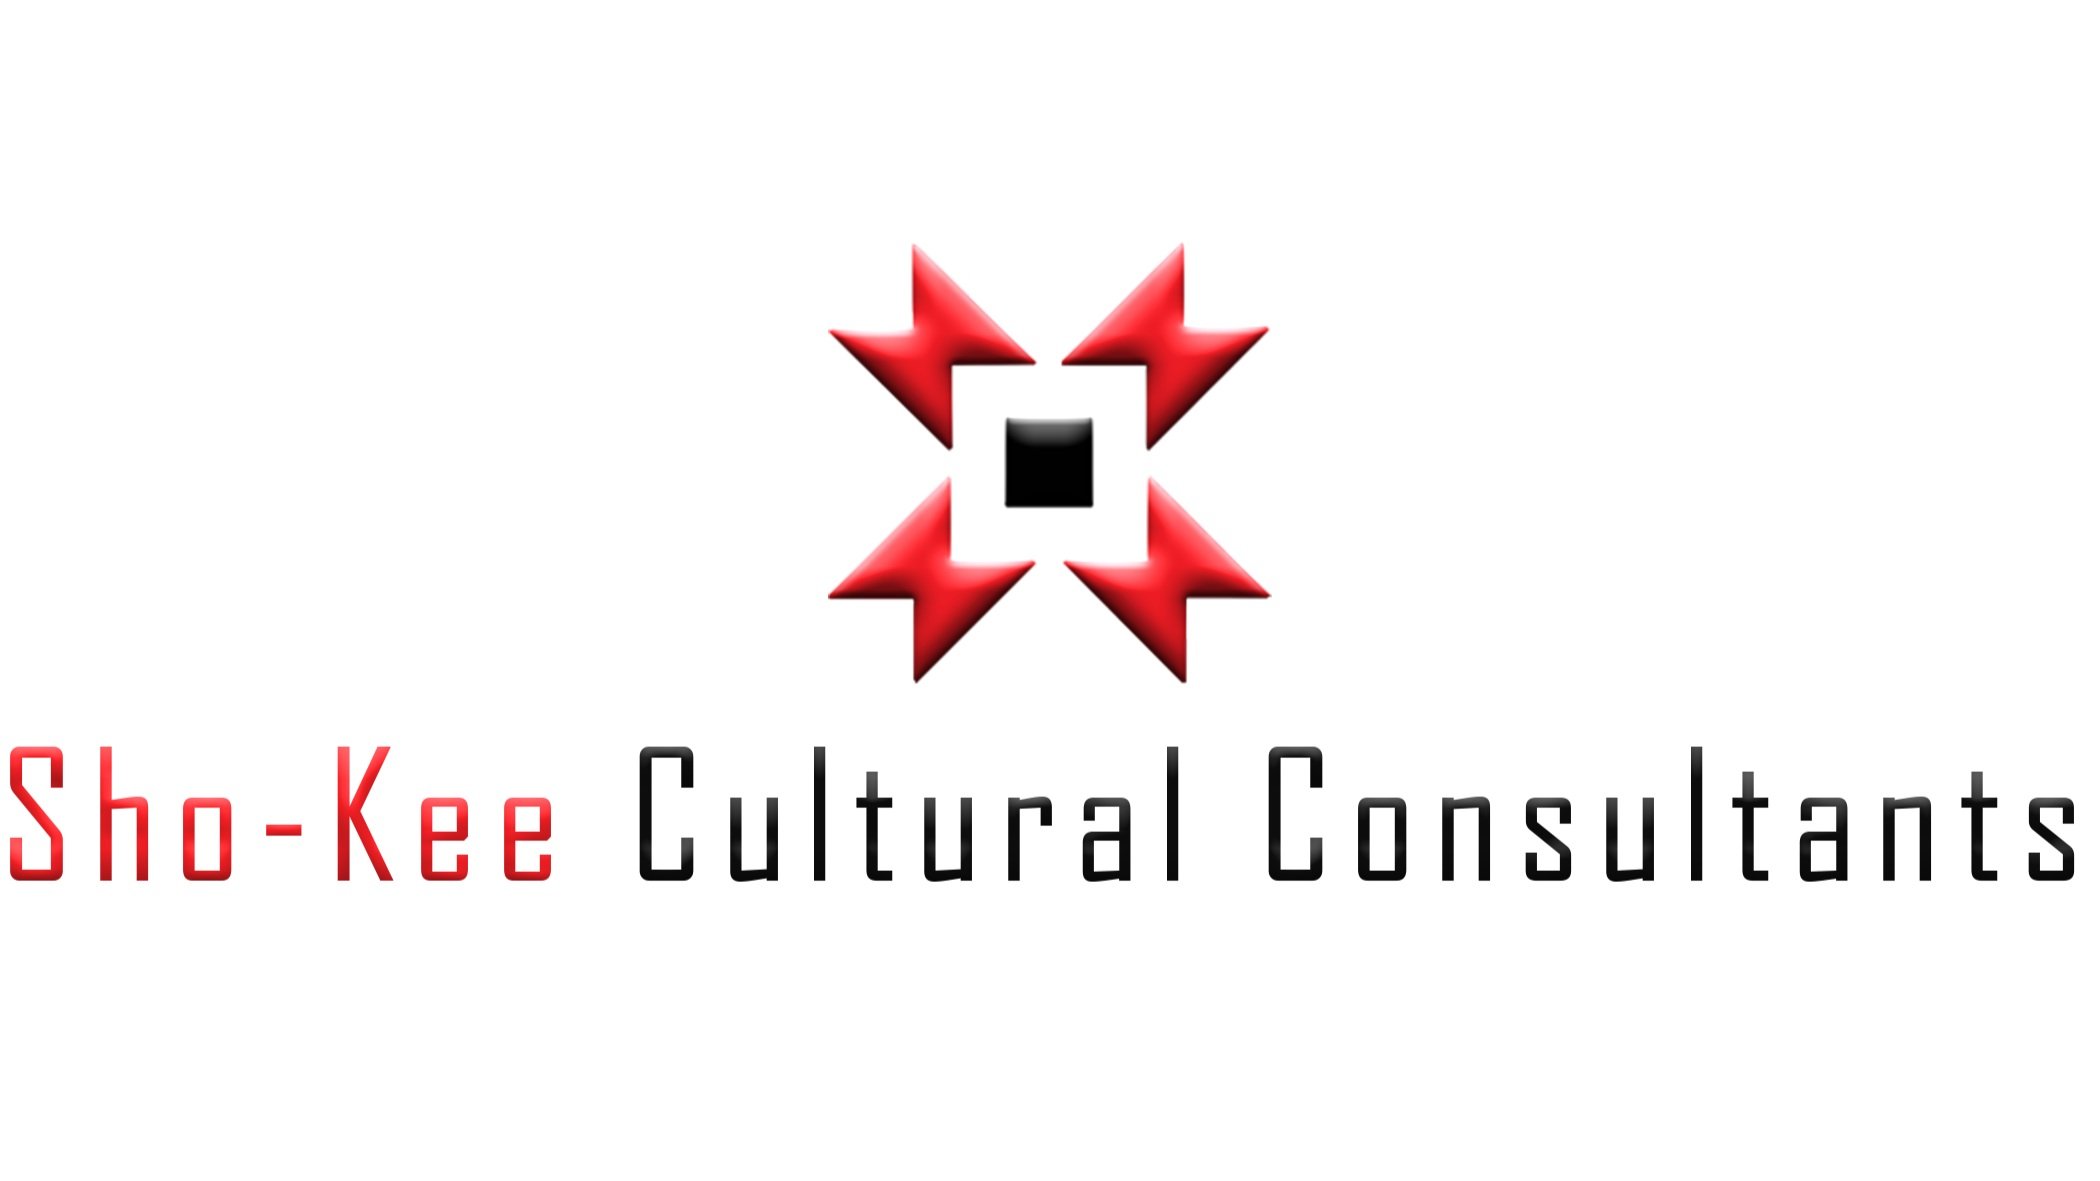 Sho-Kee Cultural Consultants